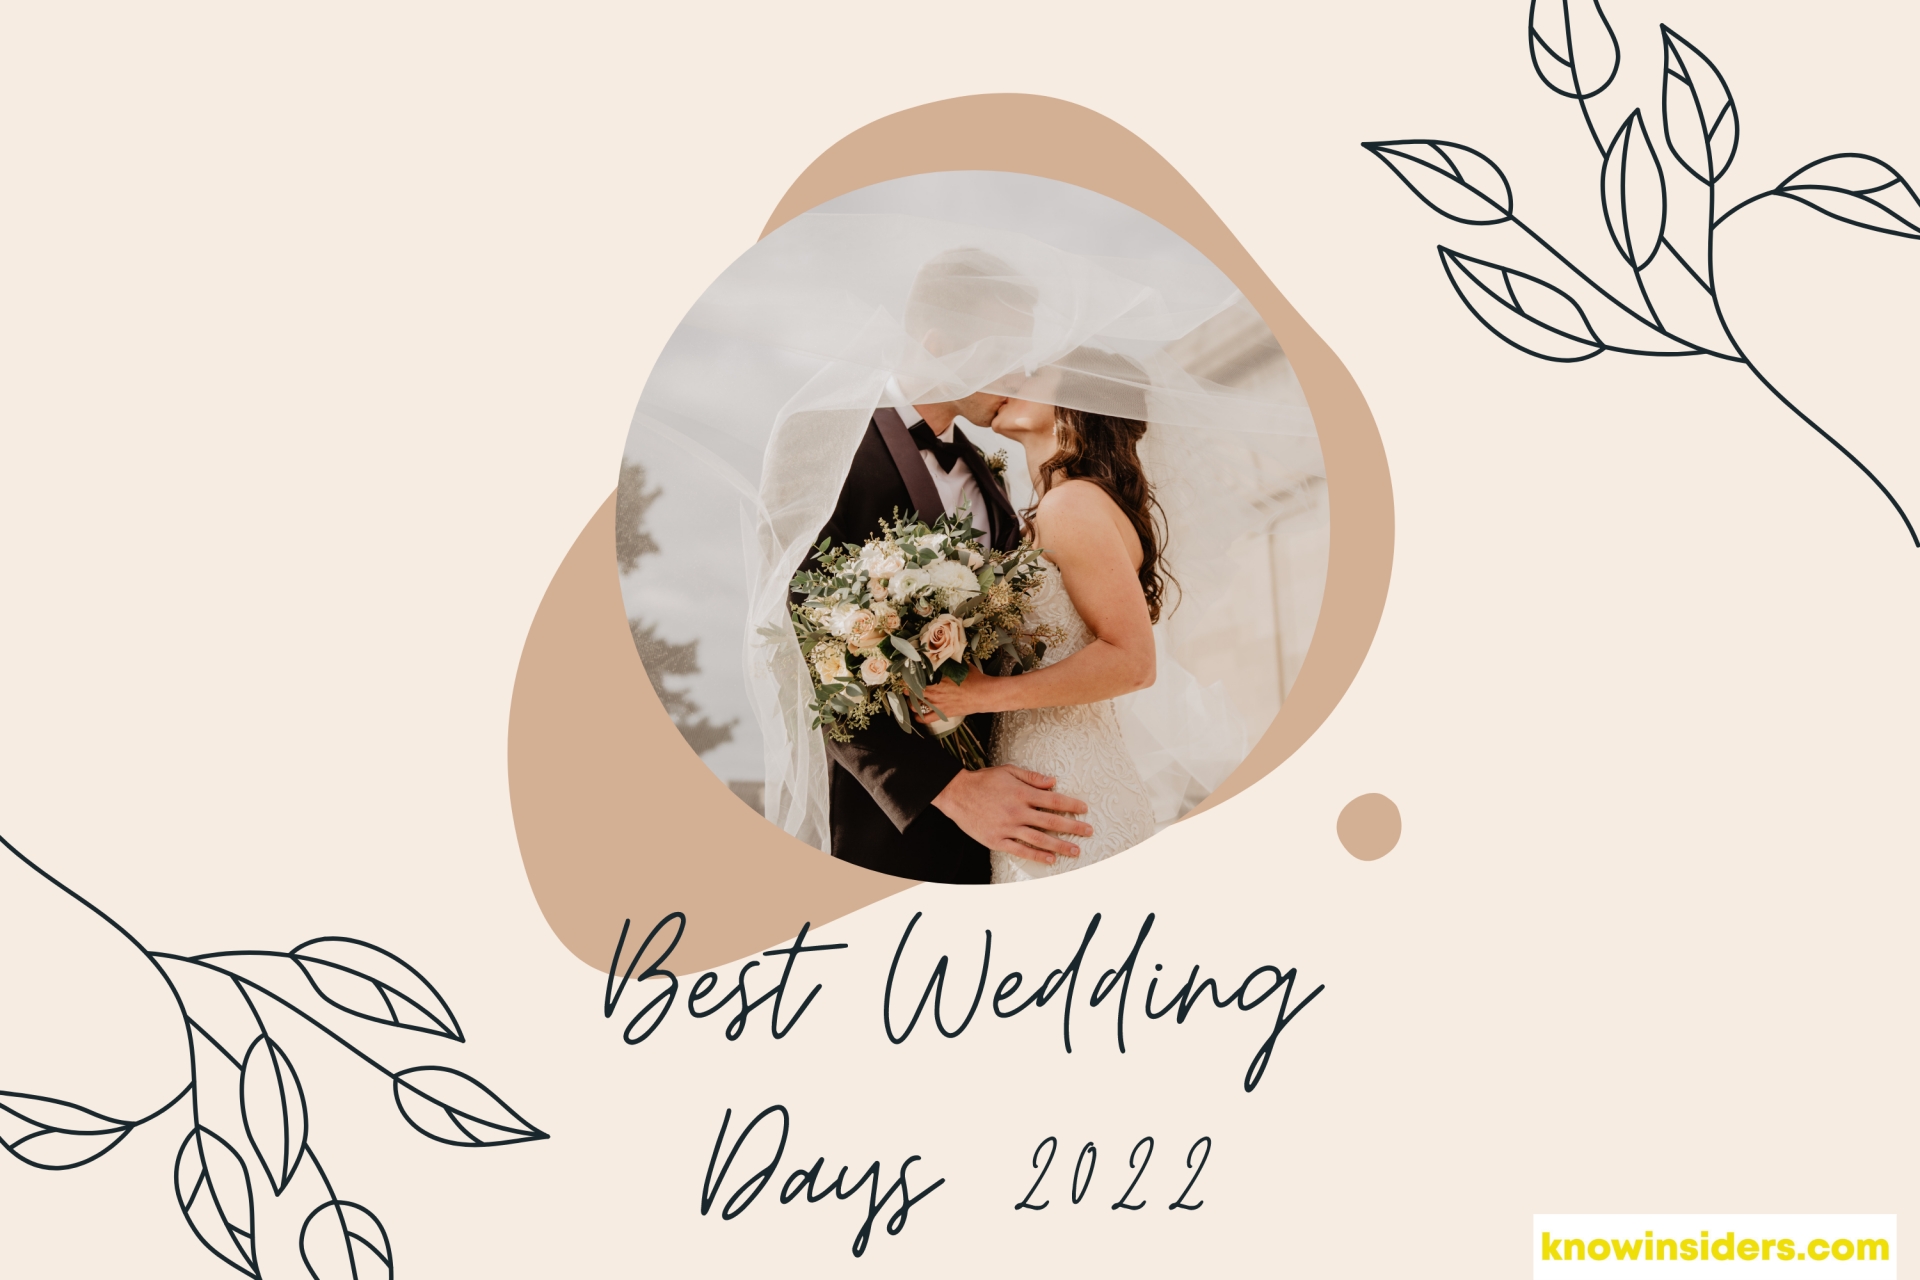 What Are The Best Wedding Days For Every Zodiac Sign In 2022?